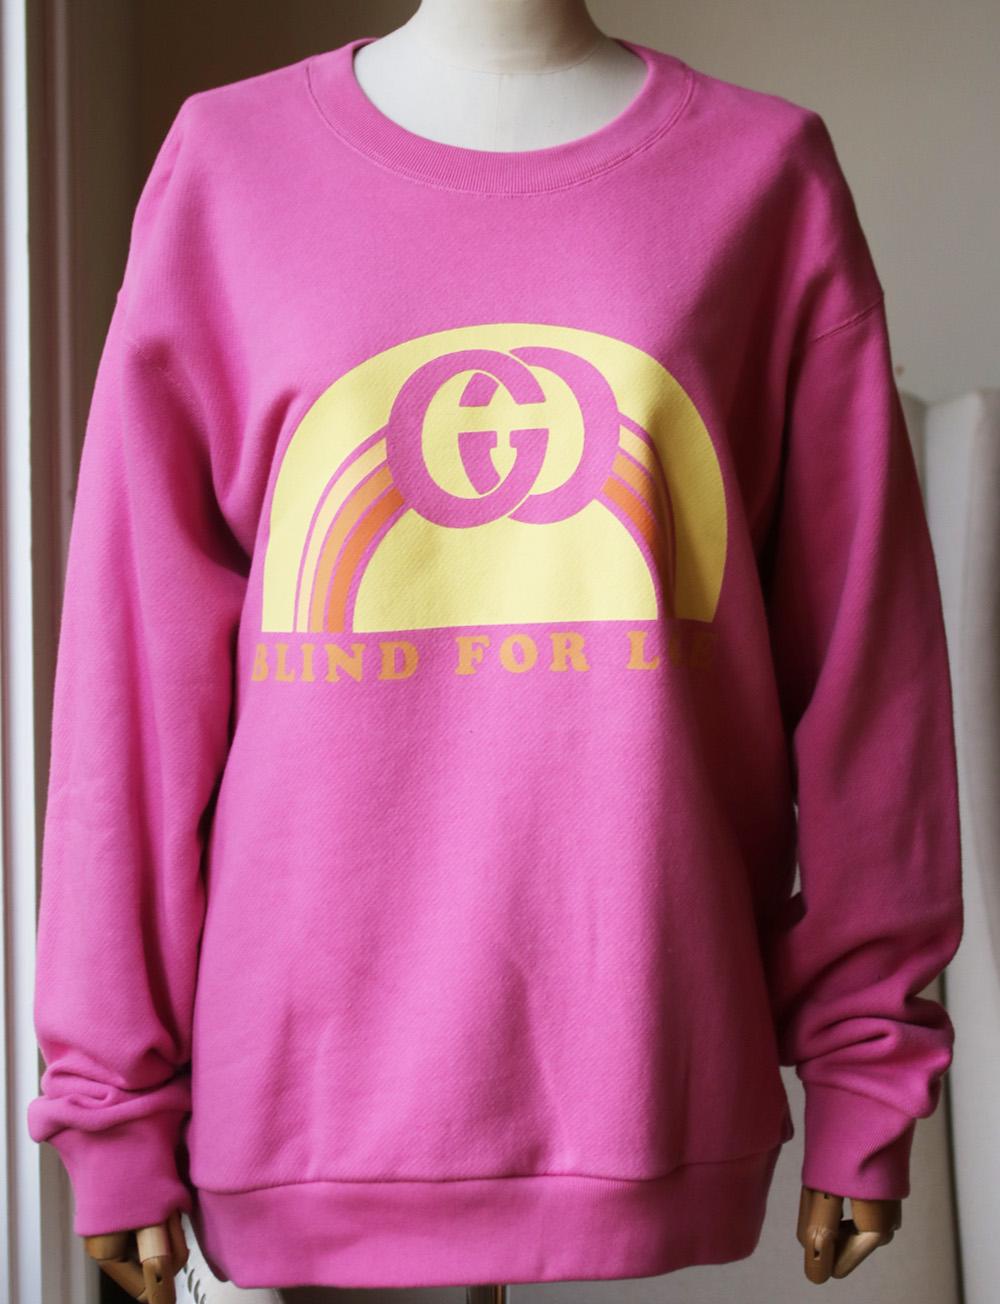 An oversized sweatshirt with 'Blind For Love' print! Pink heavy felted cotton jersey. Yellow and pink print detail on the front. Crewneck. 100% cotton. Made in Italy. 

Size: Medium (UK 10, US 6, FR 38, IT 42)

Condition: As new condition, no sign